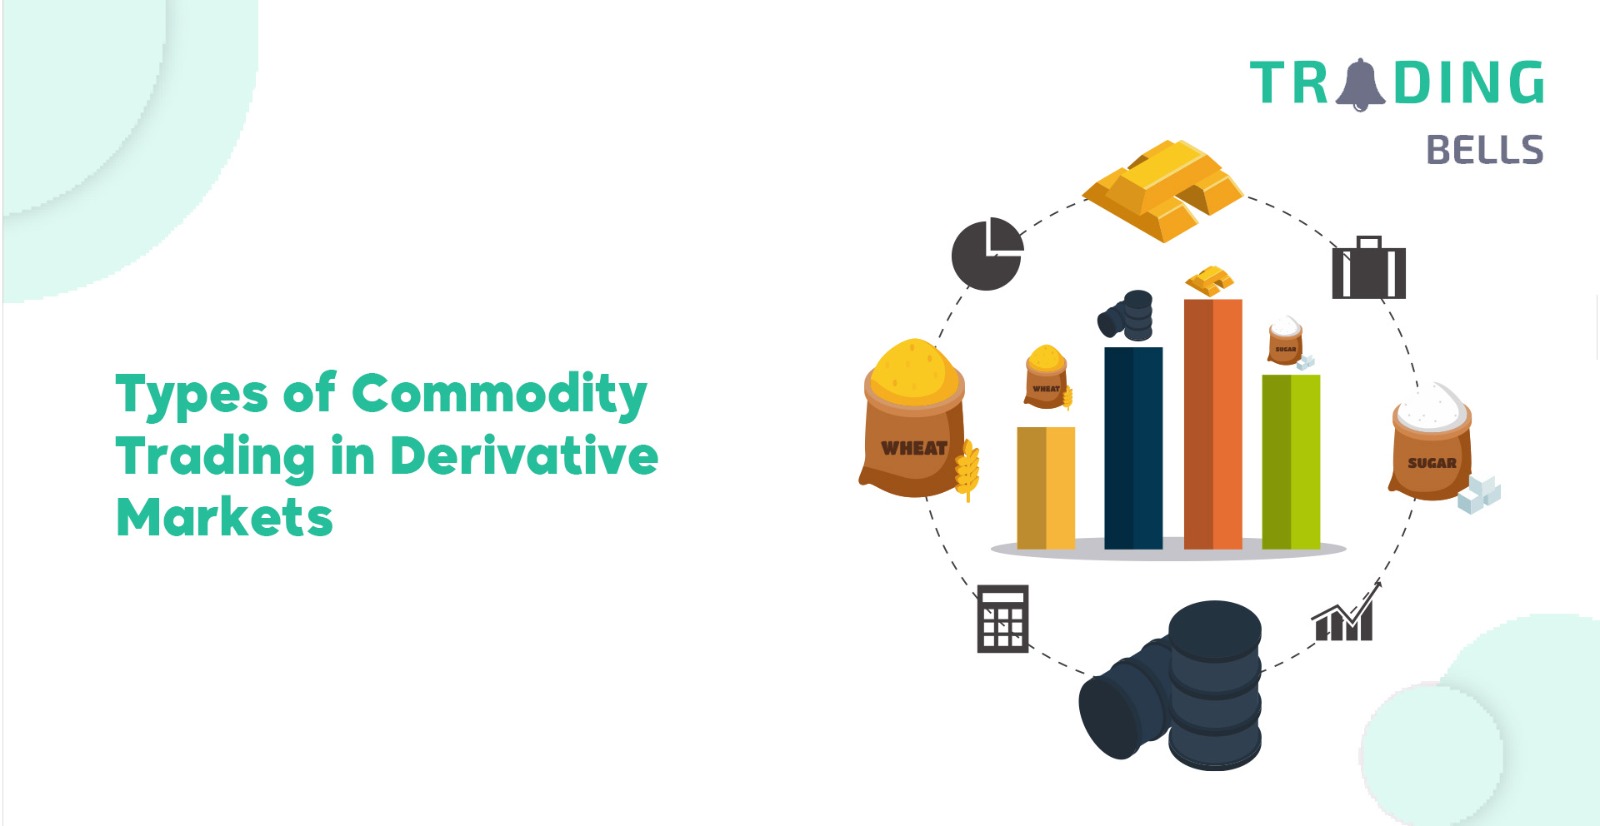 Types of Commodity Trading in Derivative Markets